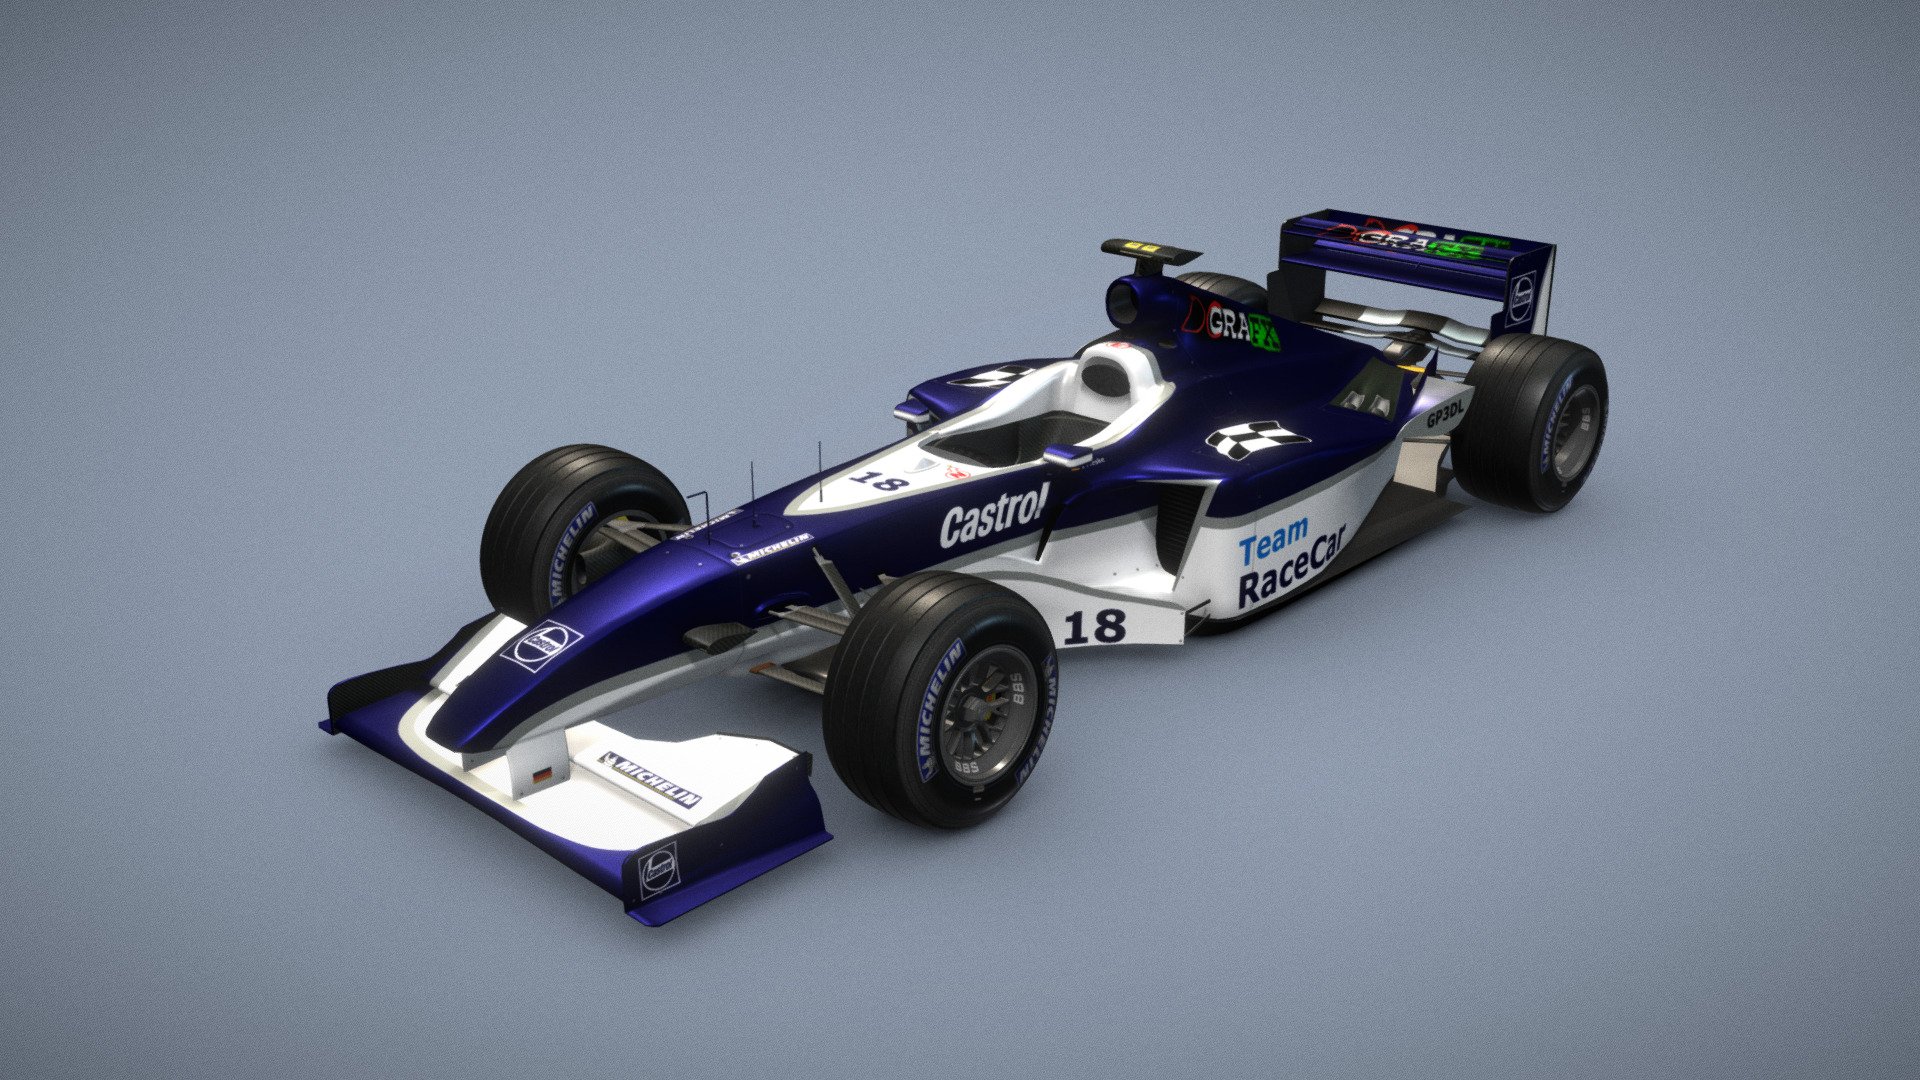 The RC-09 of the virtual RaceCar F1 team was originally designed in 2001 for use in the GrandPrix3 F1 game. It was used for league racing in GP3DL at the time.
This car is a new model resembling the RC-09 in High-Resolution as it was meant to be.

Original: http://racecarf1.com/cars/rc-09.html

Credits: 
Original model and tires based on BAR 002 and Ferrari F2000 by Enzojz - RaceCar RC-09 (Re-imagined model) - Download Free 3D model by Dahie 3d model